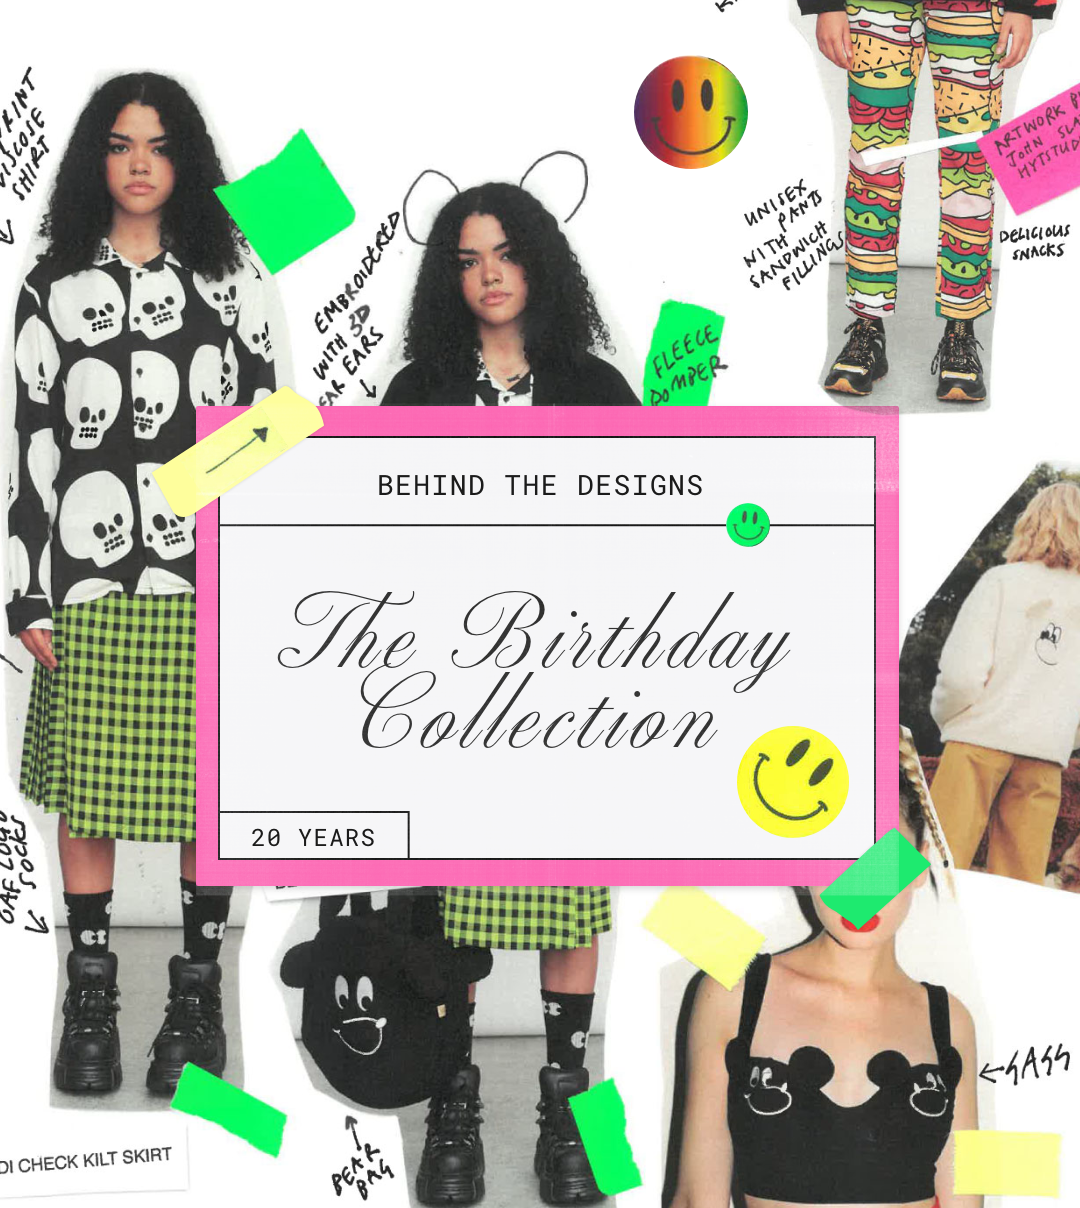 BEHIND THE DESIGNS - The Birthday Collection